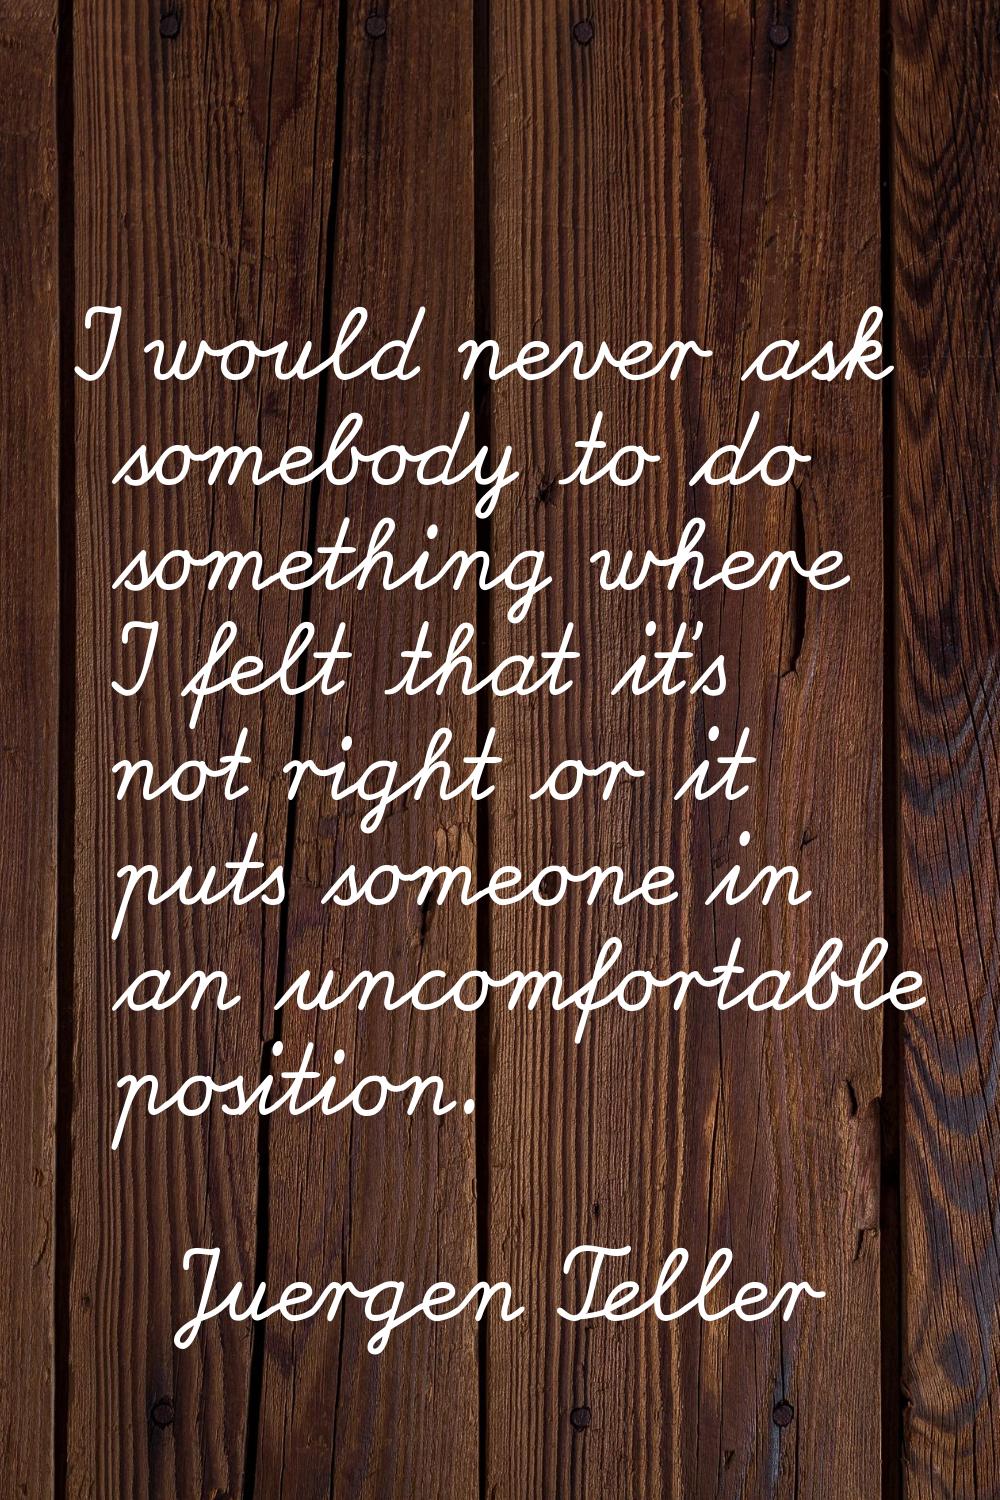 I would never ask somebody to do something where I felt that it's not right or it puts someone in a